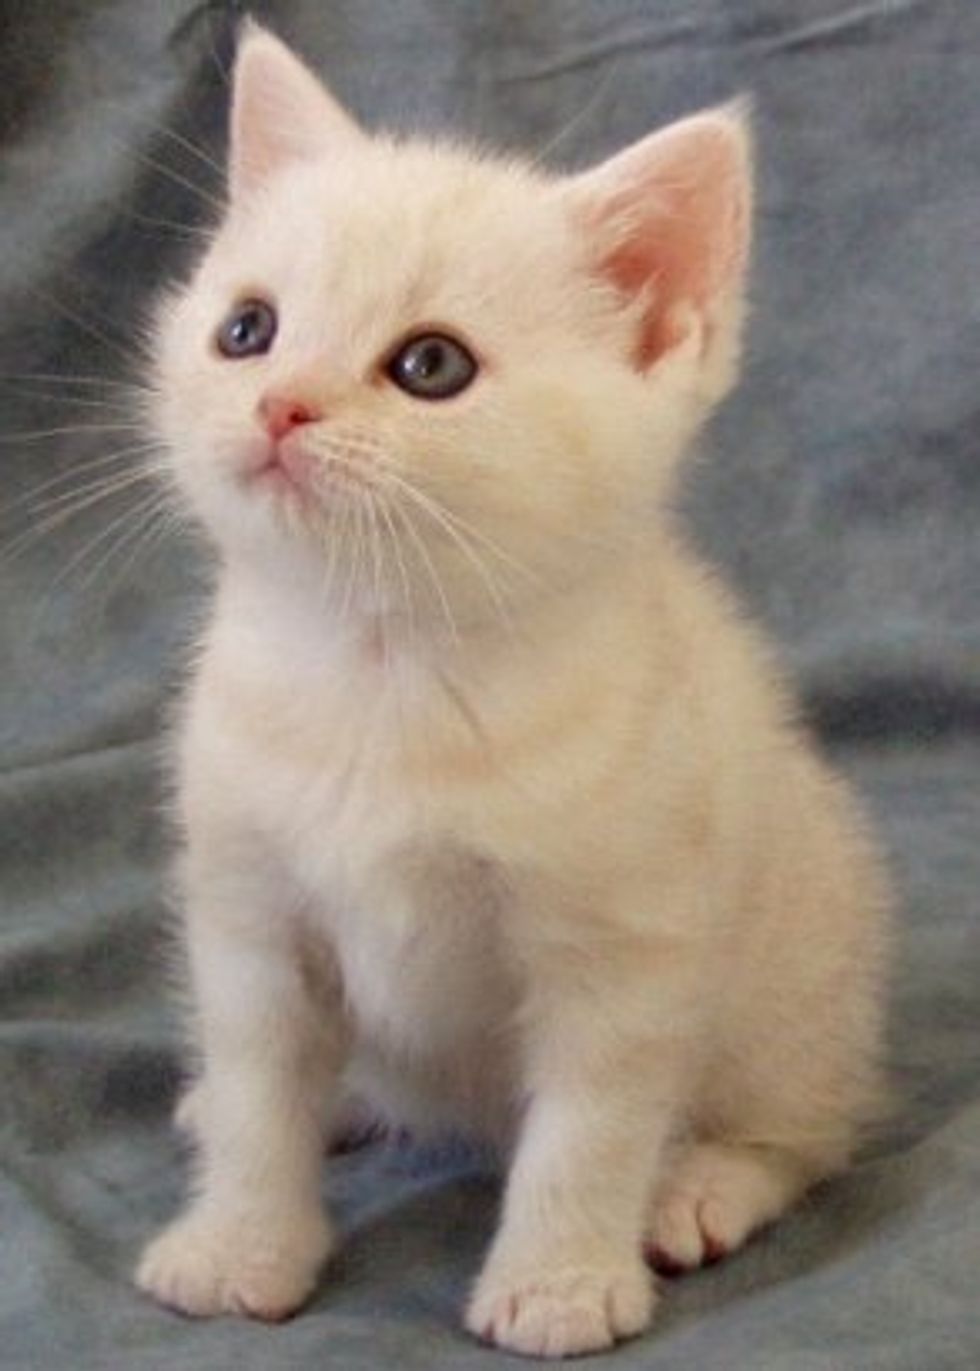 Tips on Recusing Kittens and Care for Orphan Kittens